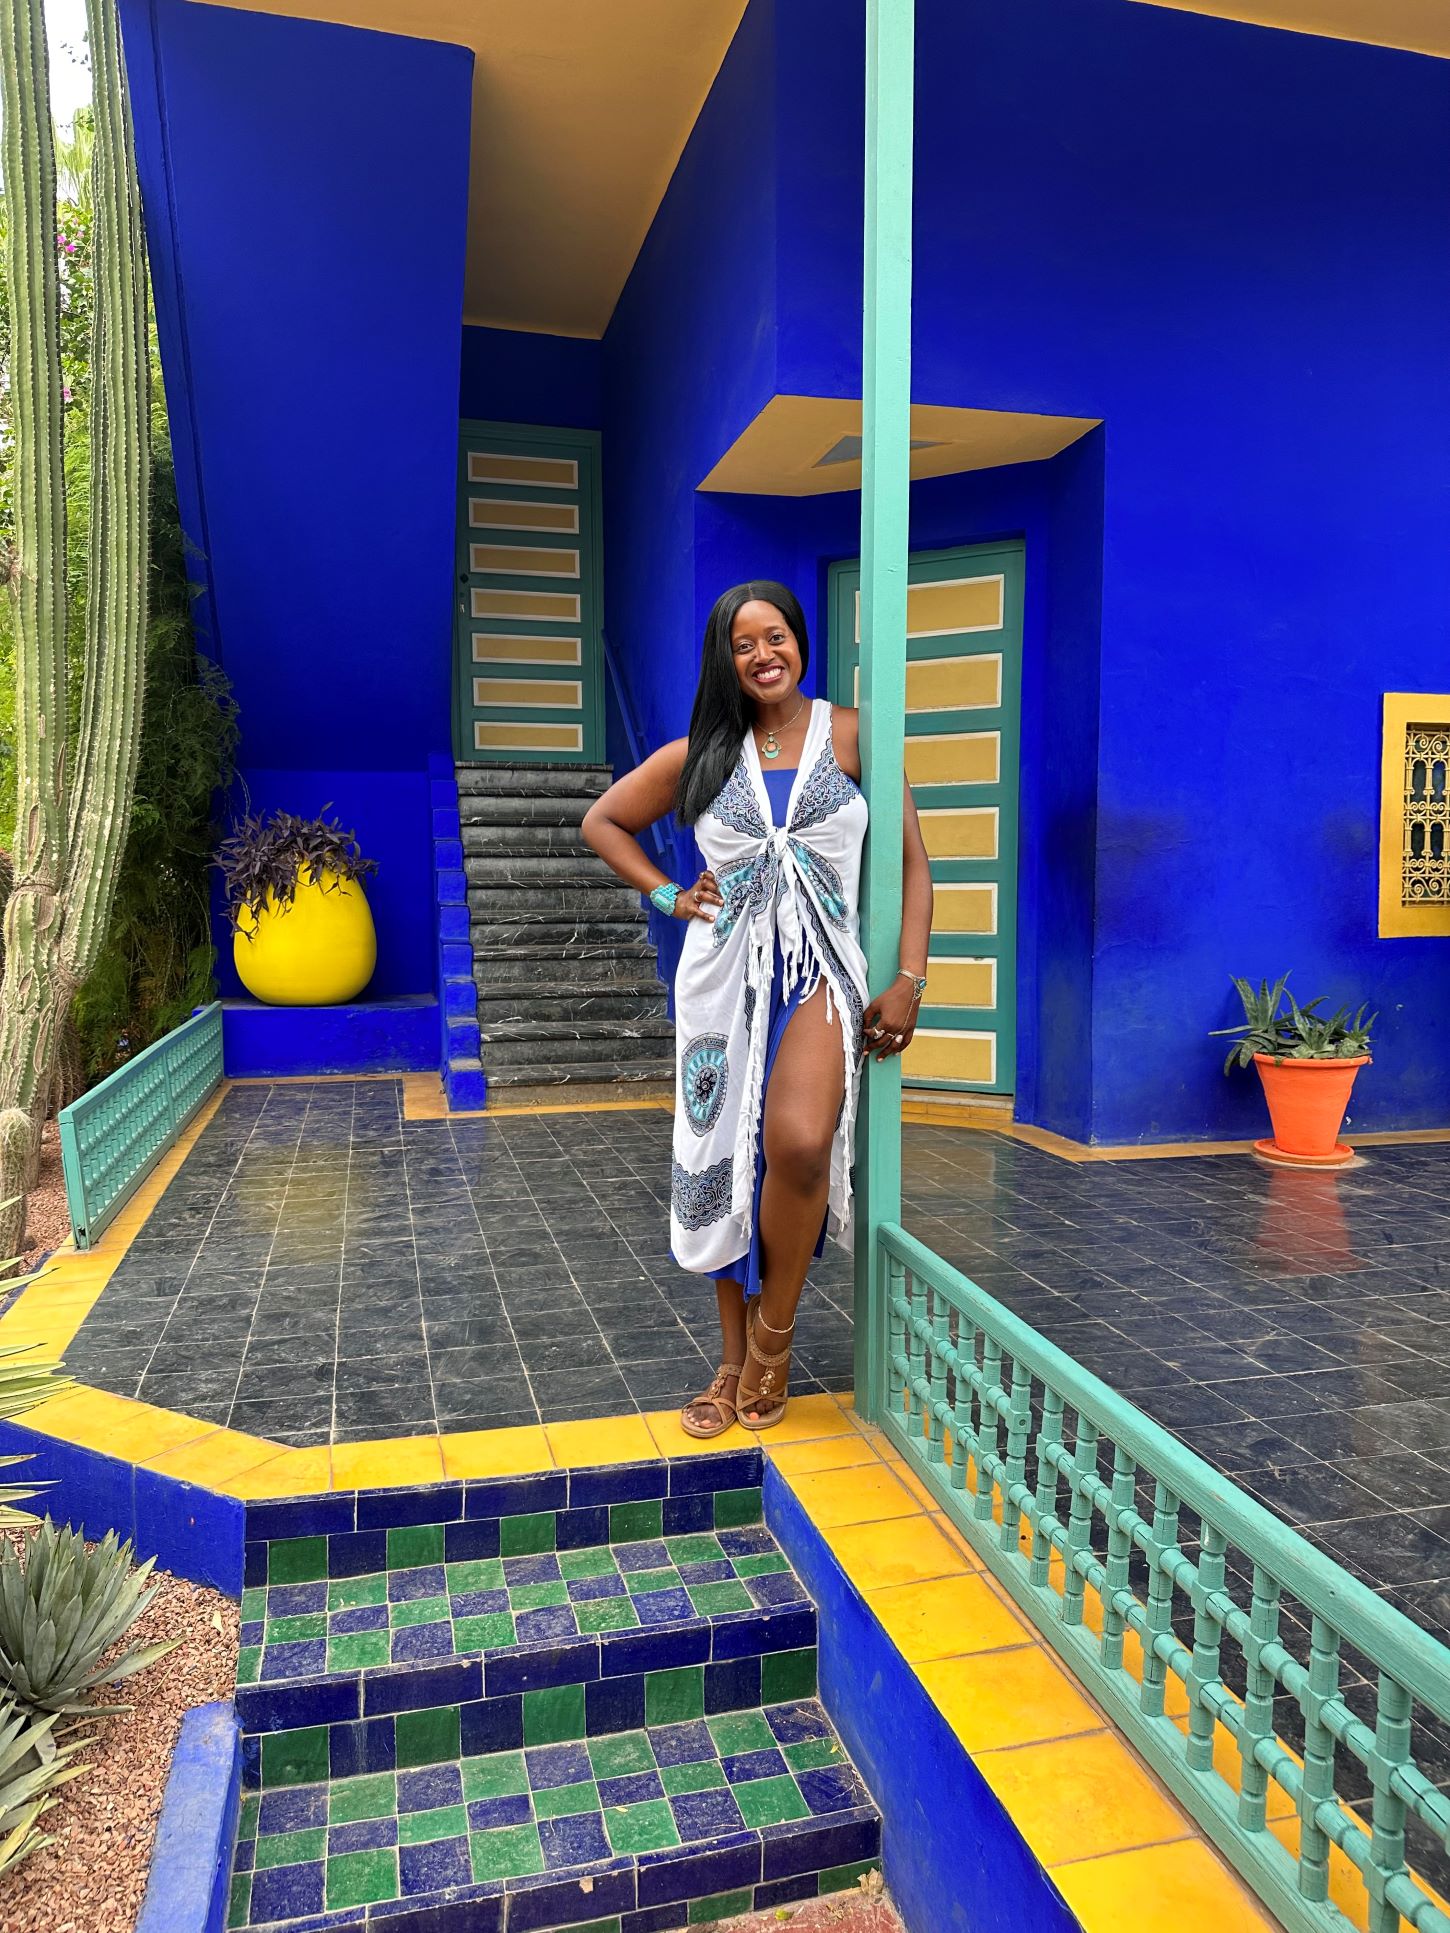 An image of a woman standing in the gardens of Jardin Majorelle in Marrakech.